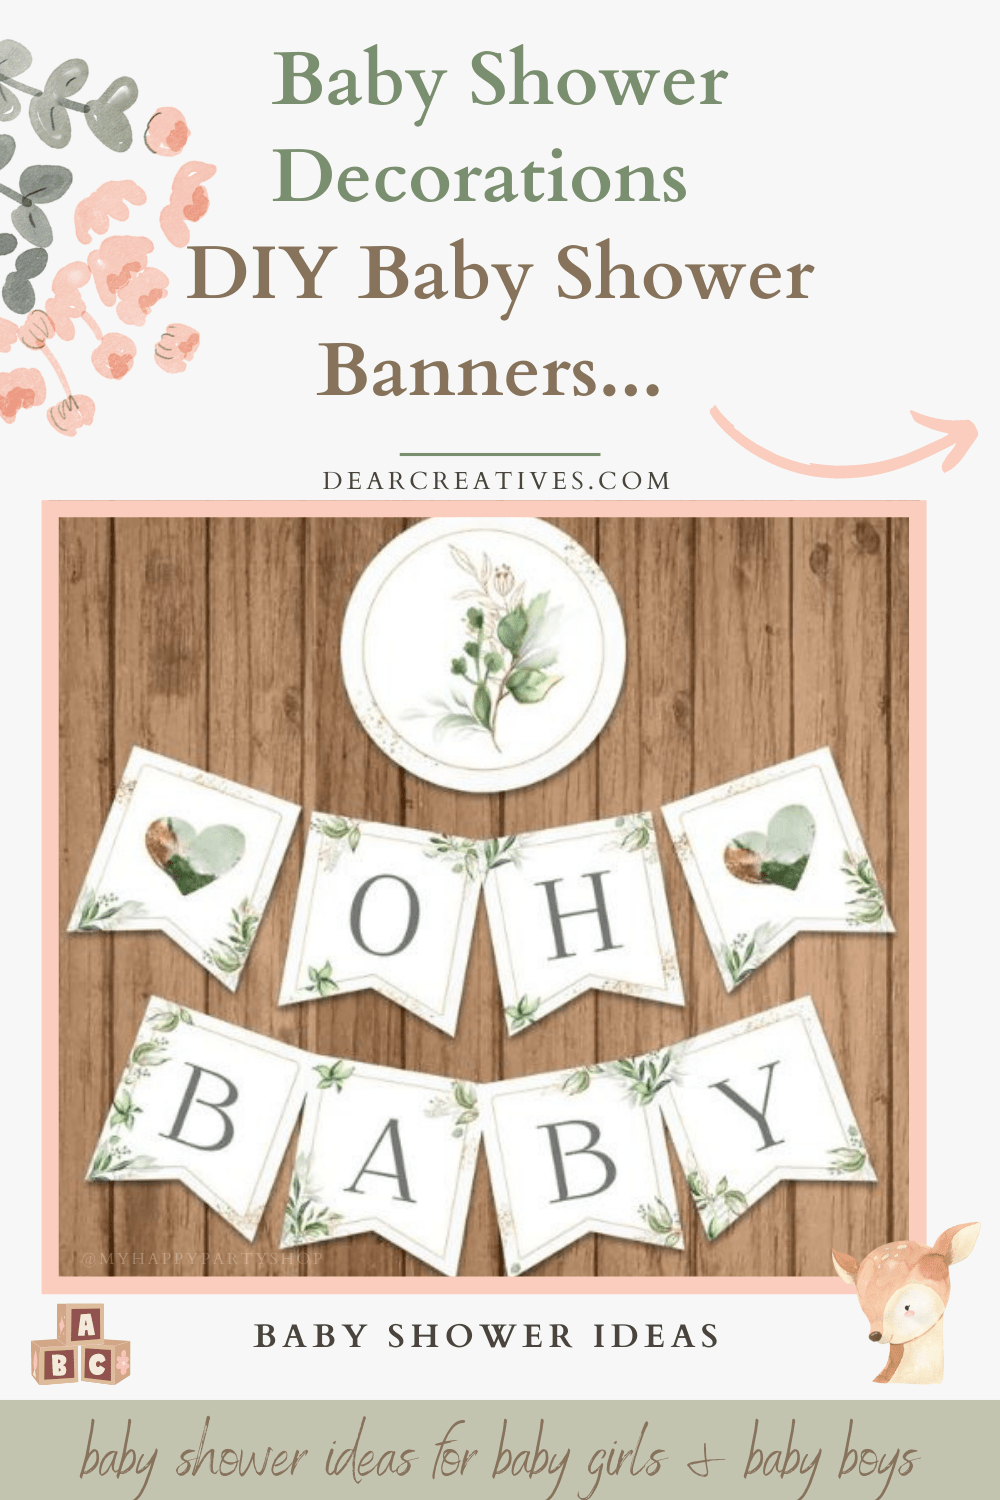 DIY Baby Shower Banners + Baby Shower Decorations